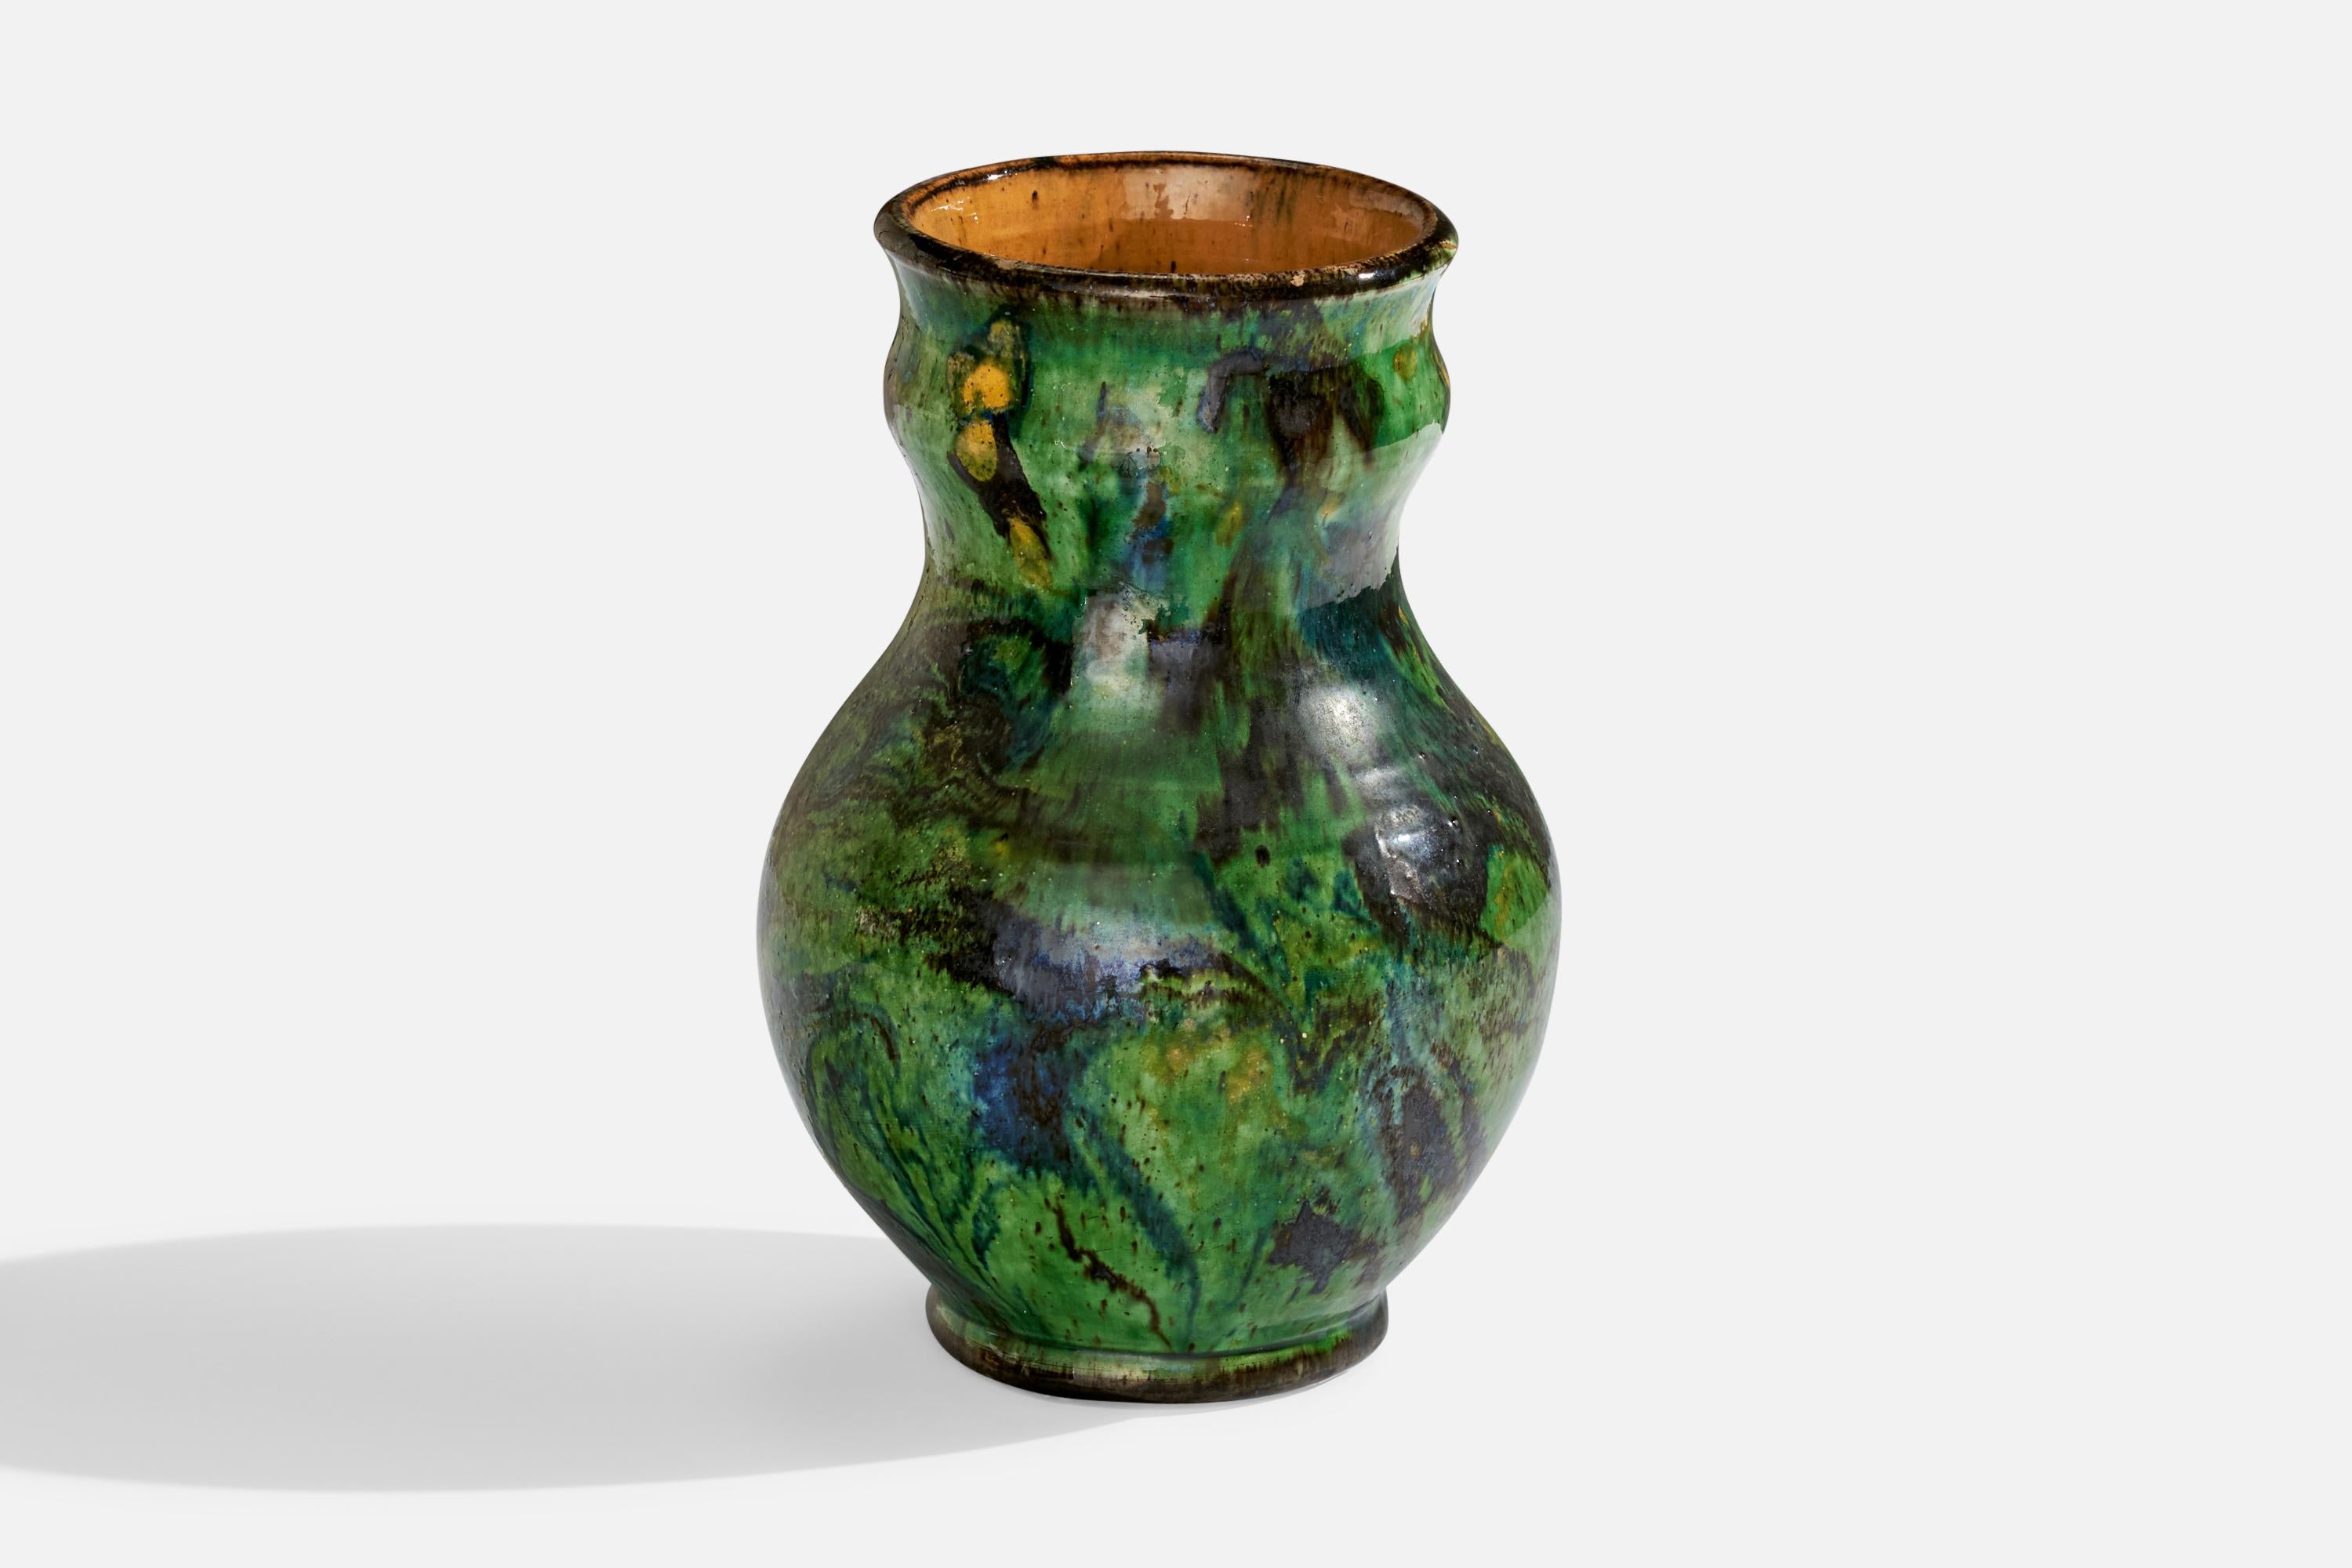 A green-painted and glazed ceramic vase designed and produced in Sweden, 1933.